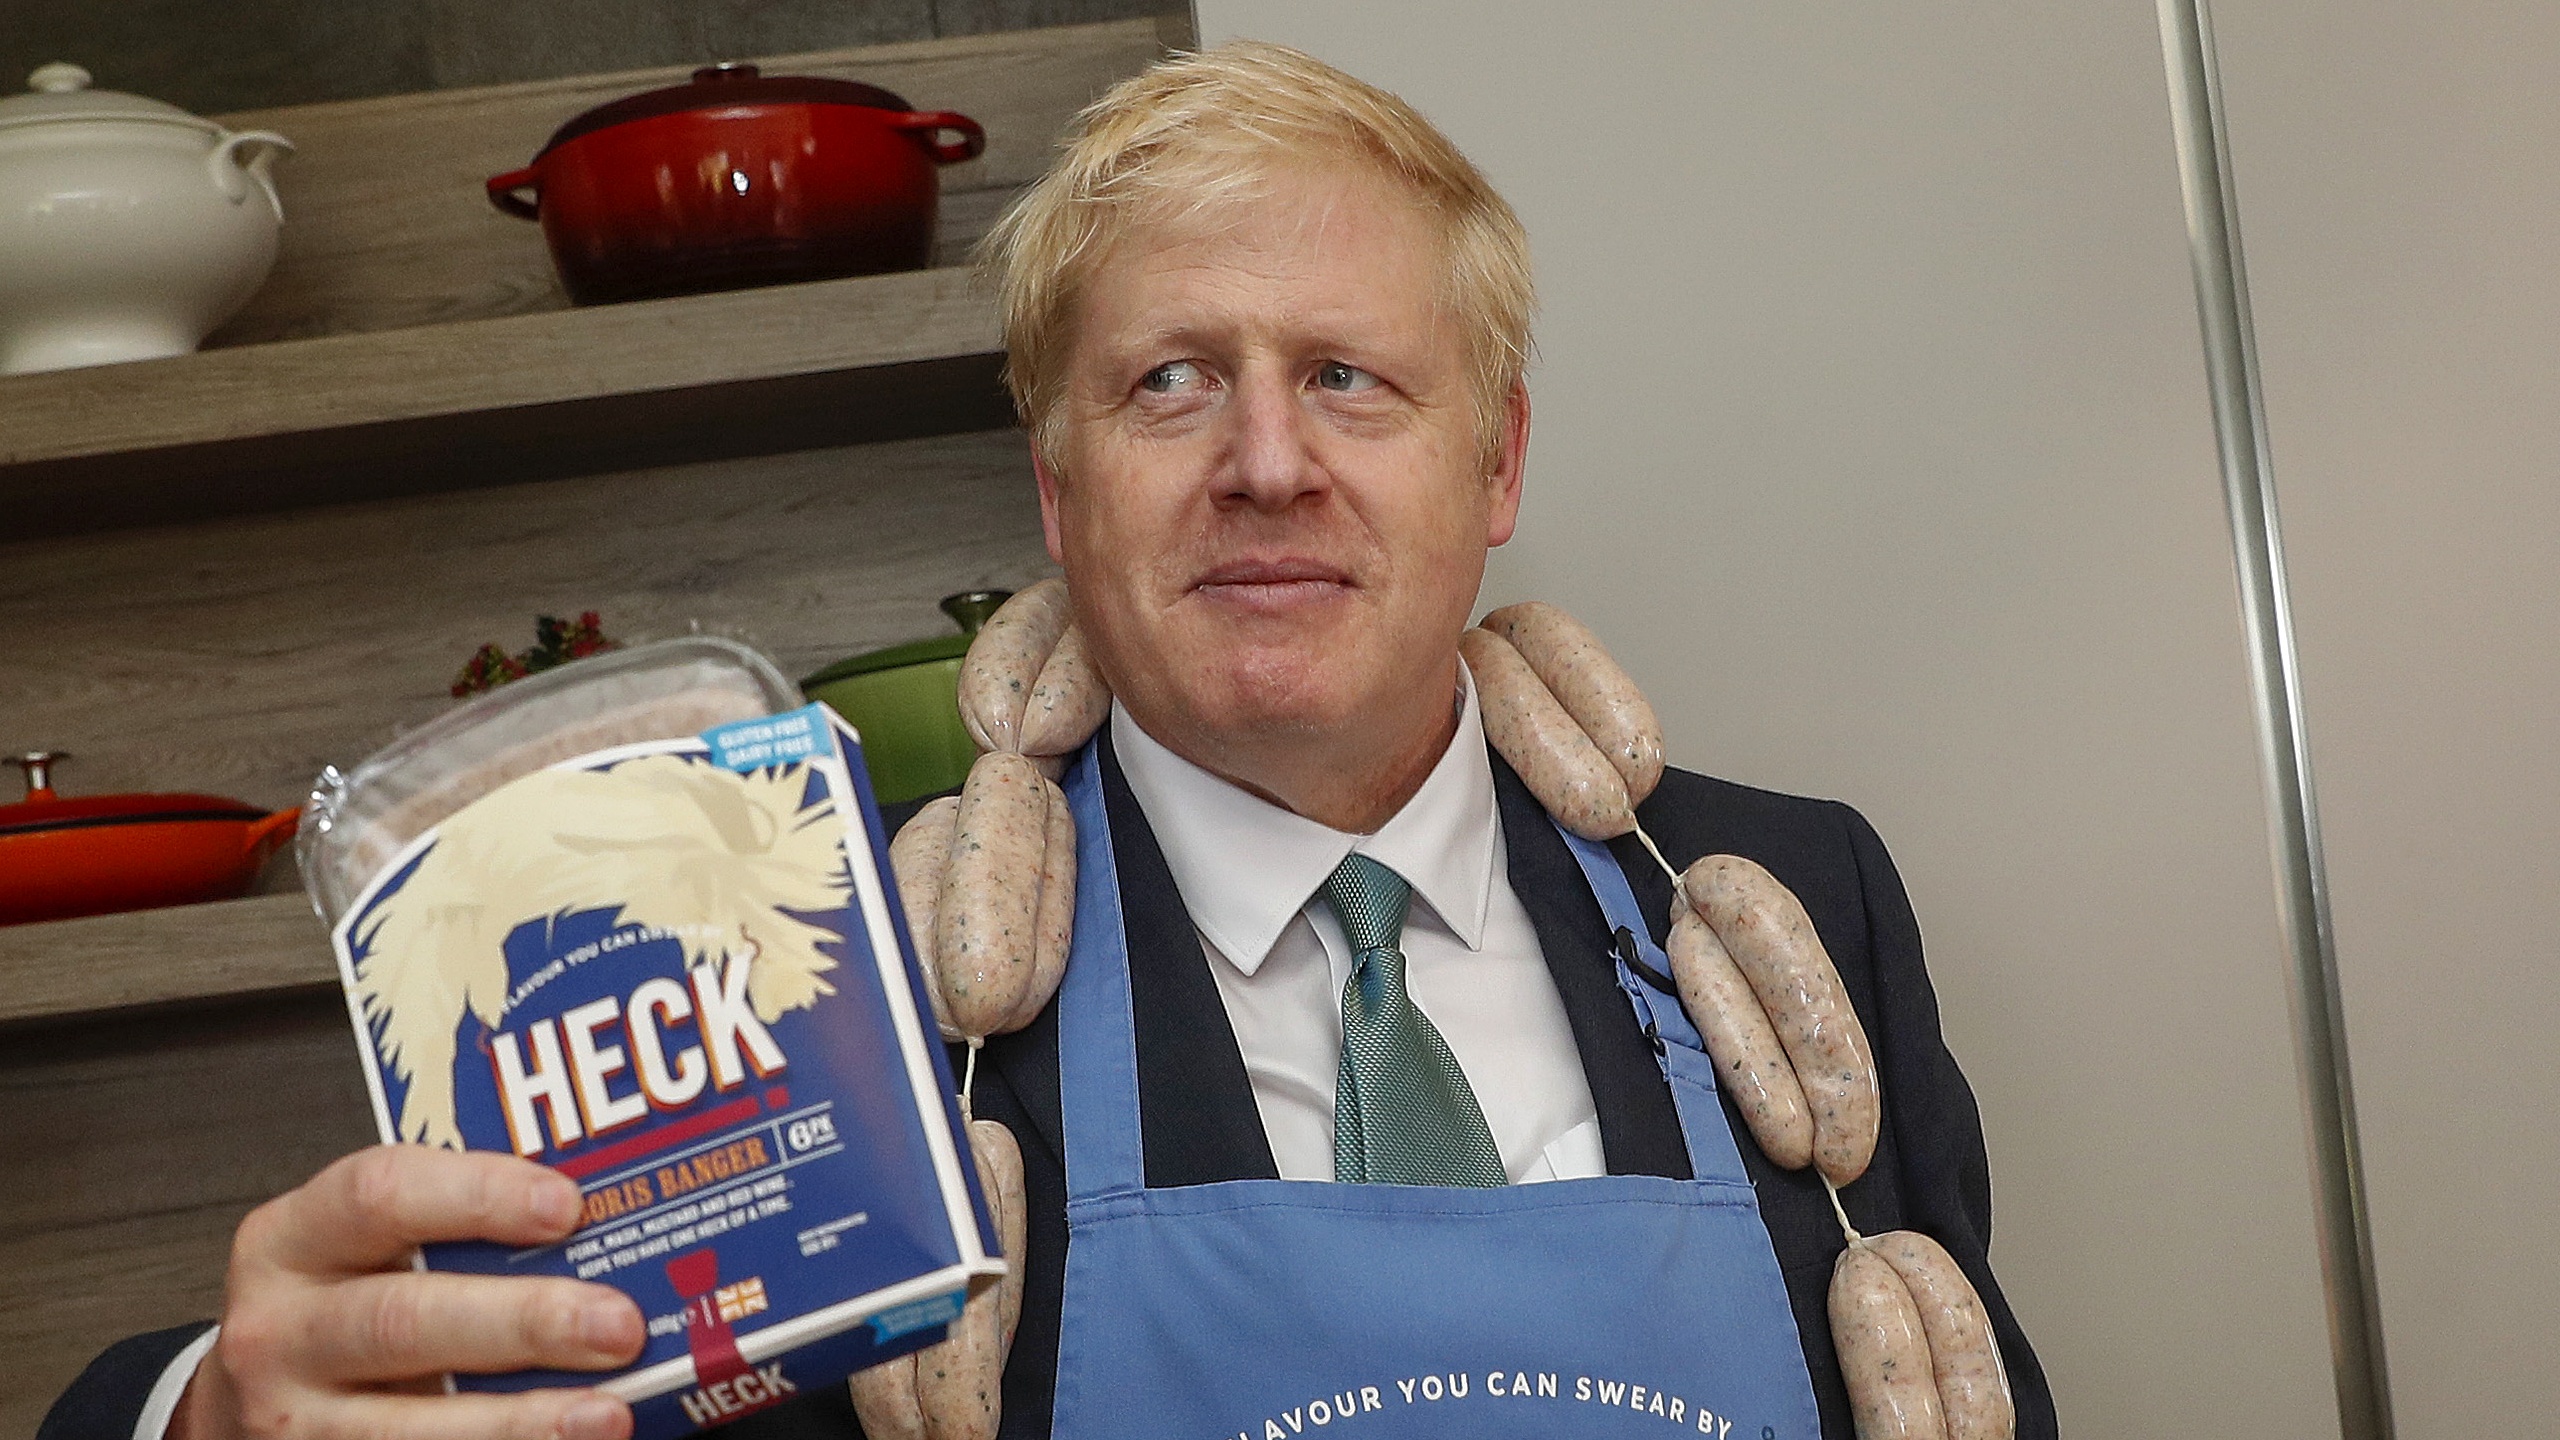 Boris Johnson poses with a string of sausages called &quot;Boris Bangers&quot; during a visit to Heck Foods.